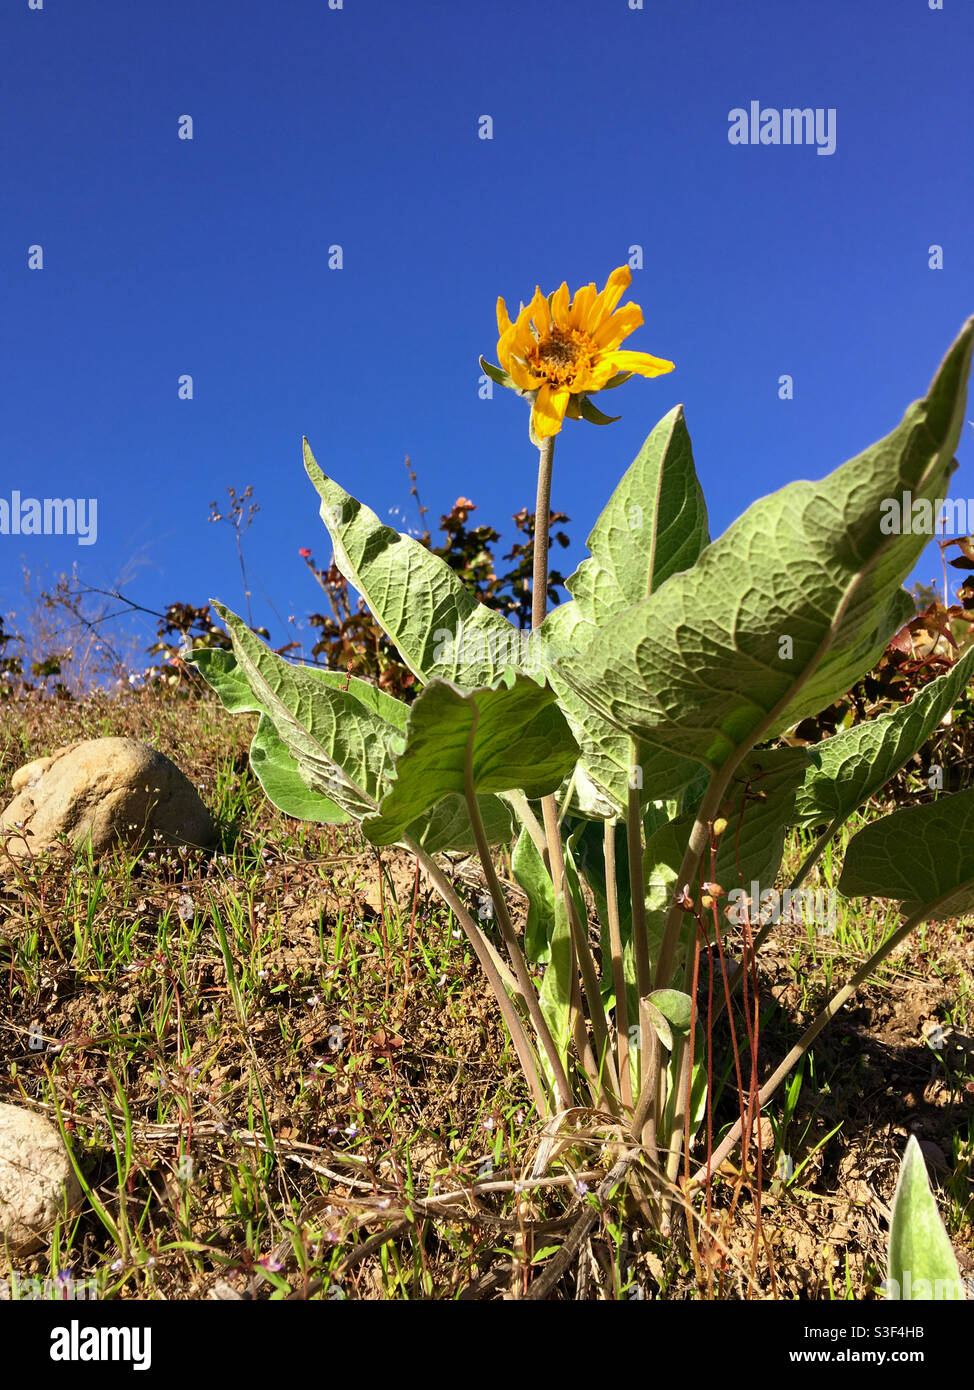 A yellow Arrowleaf Balsamroot wildflower with large green leaves in the wilderness with blue sky in the background. Stock Photo